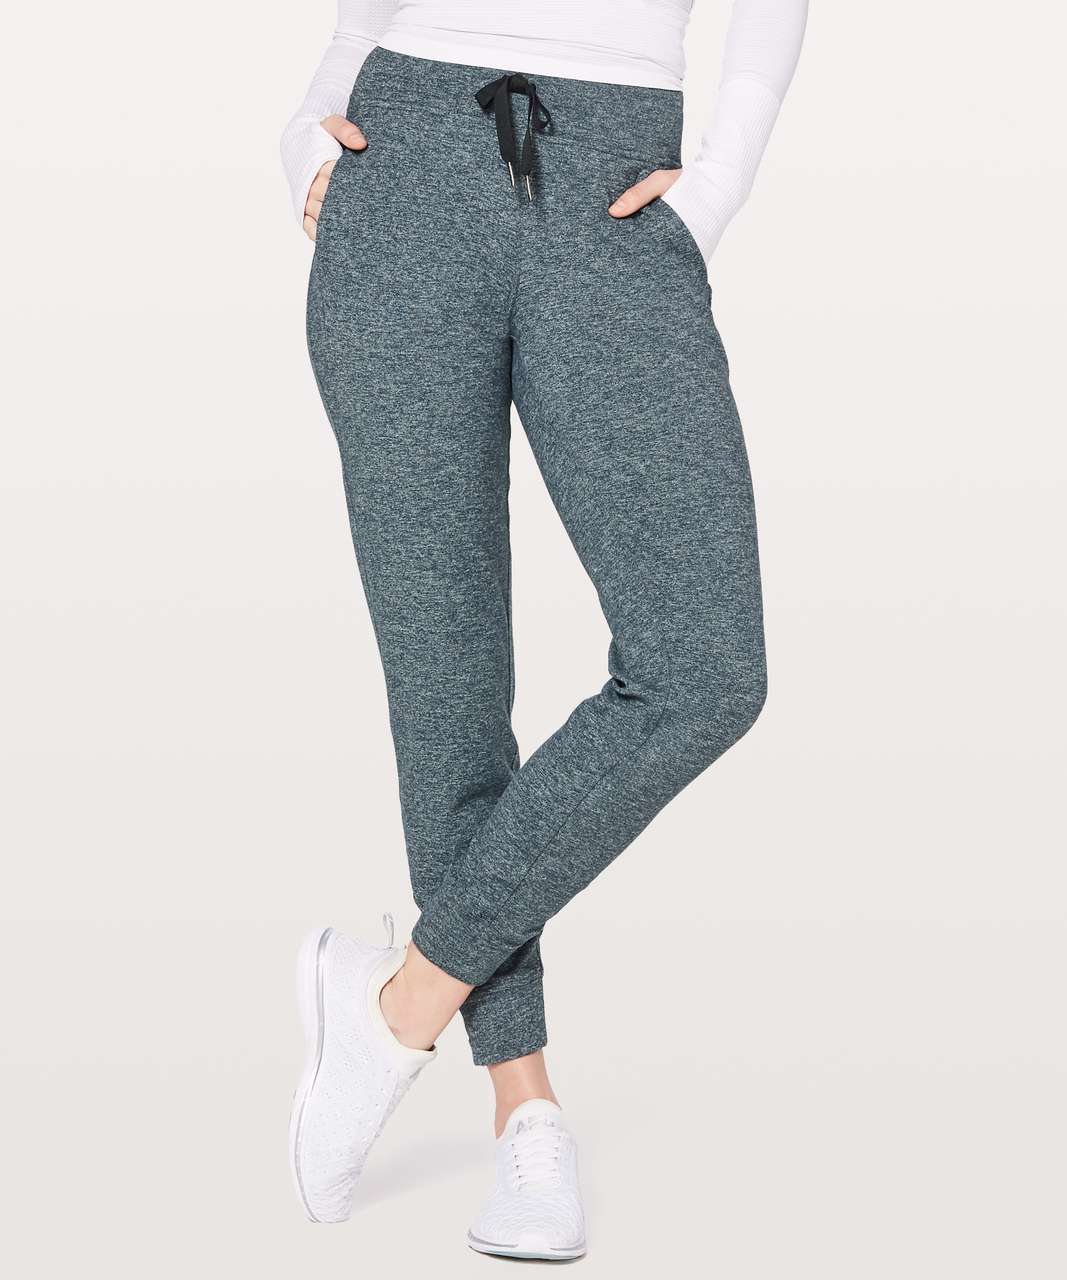 Lululemon Ready To Rulu Pant 29" - Heathered Nocturnal Teal / Nocturnal Teal